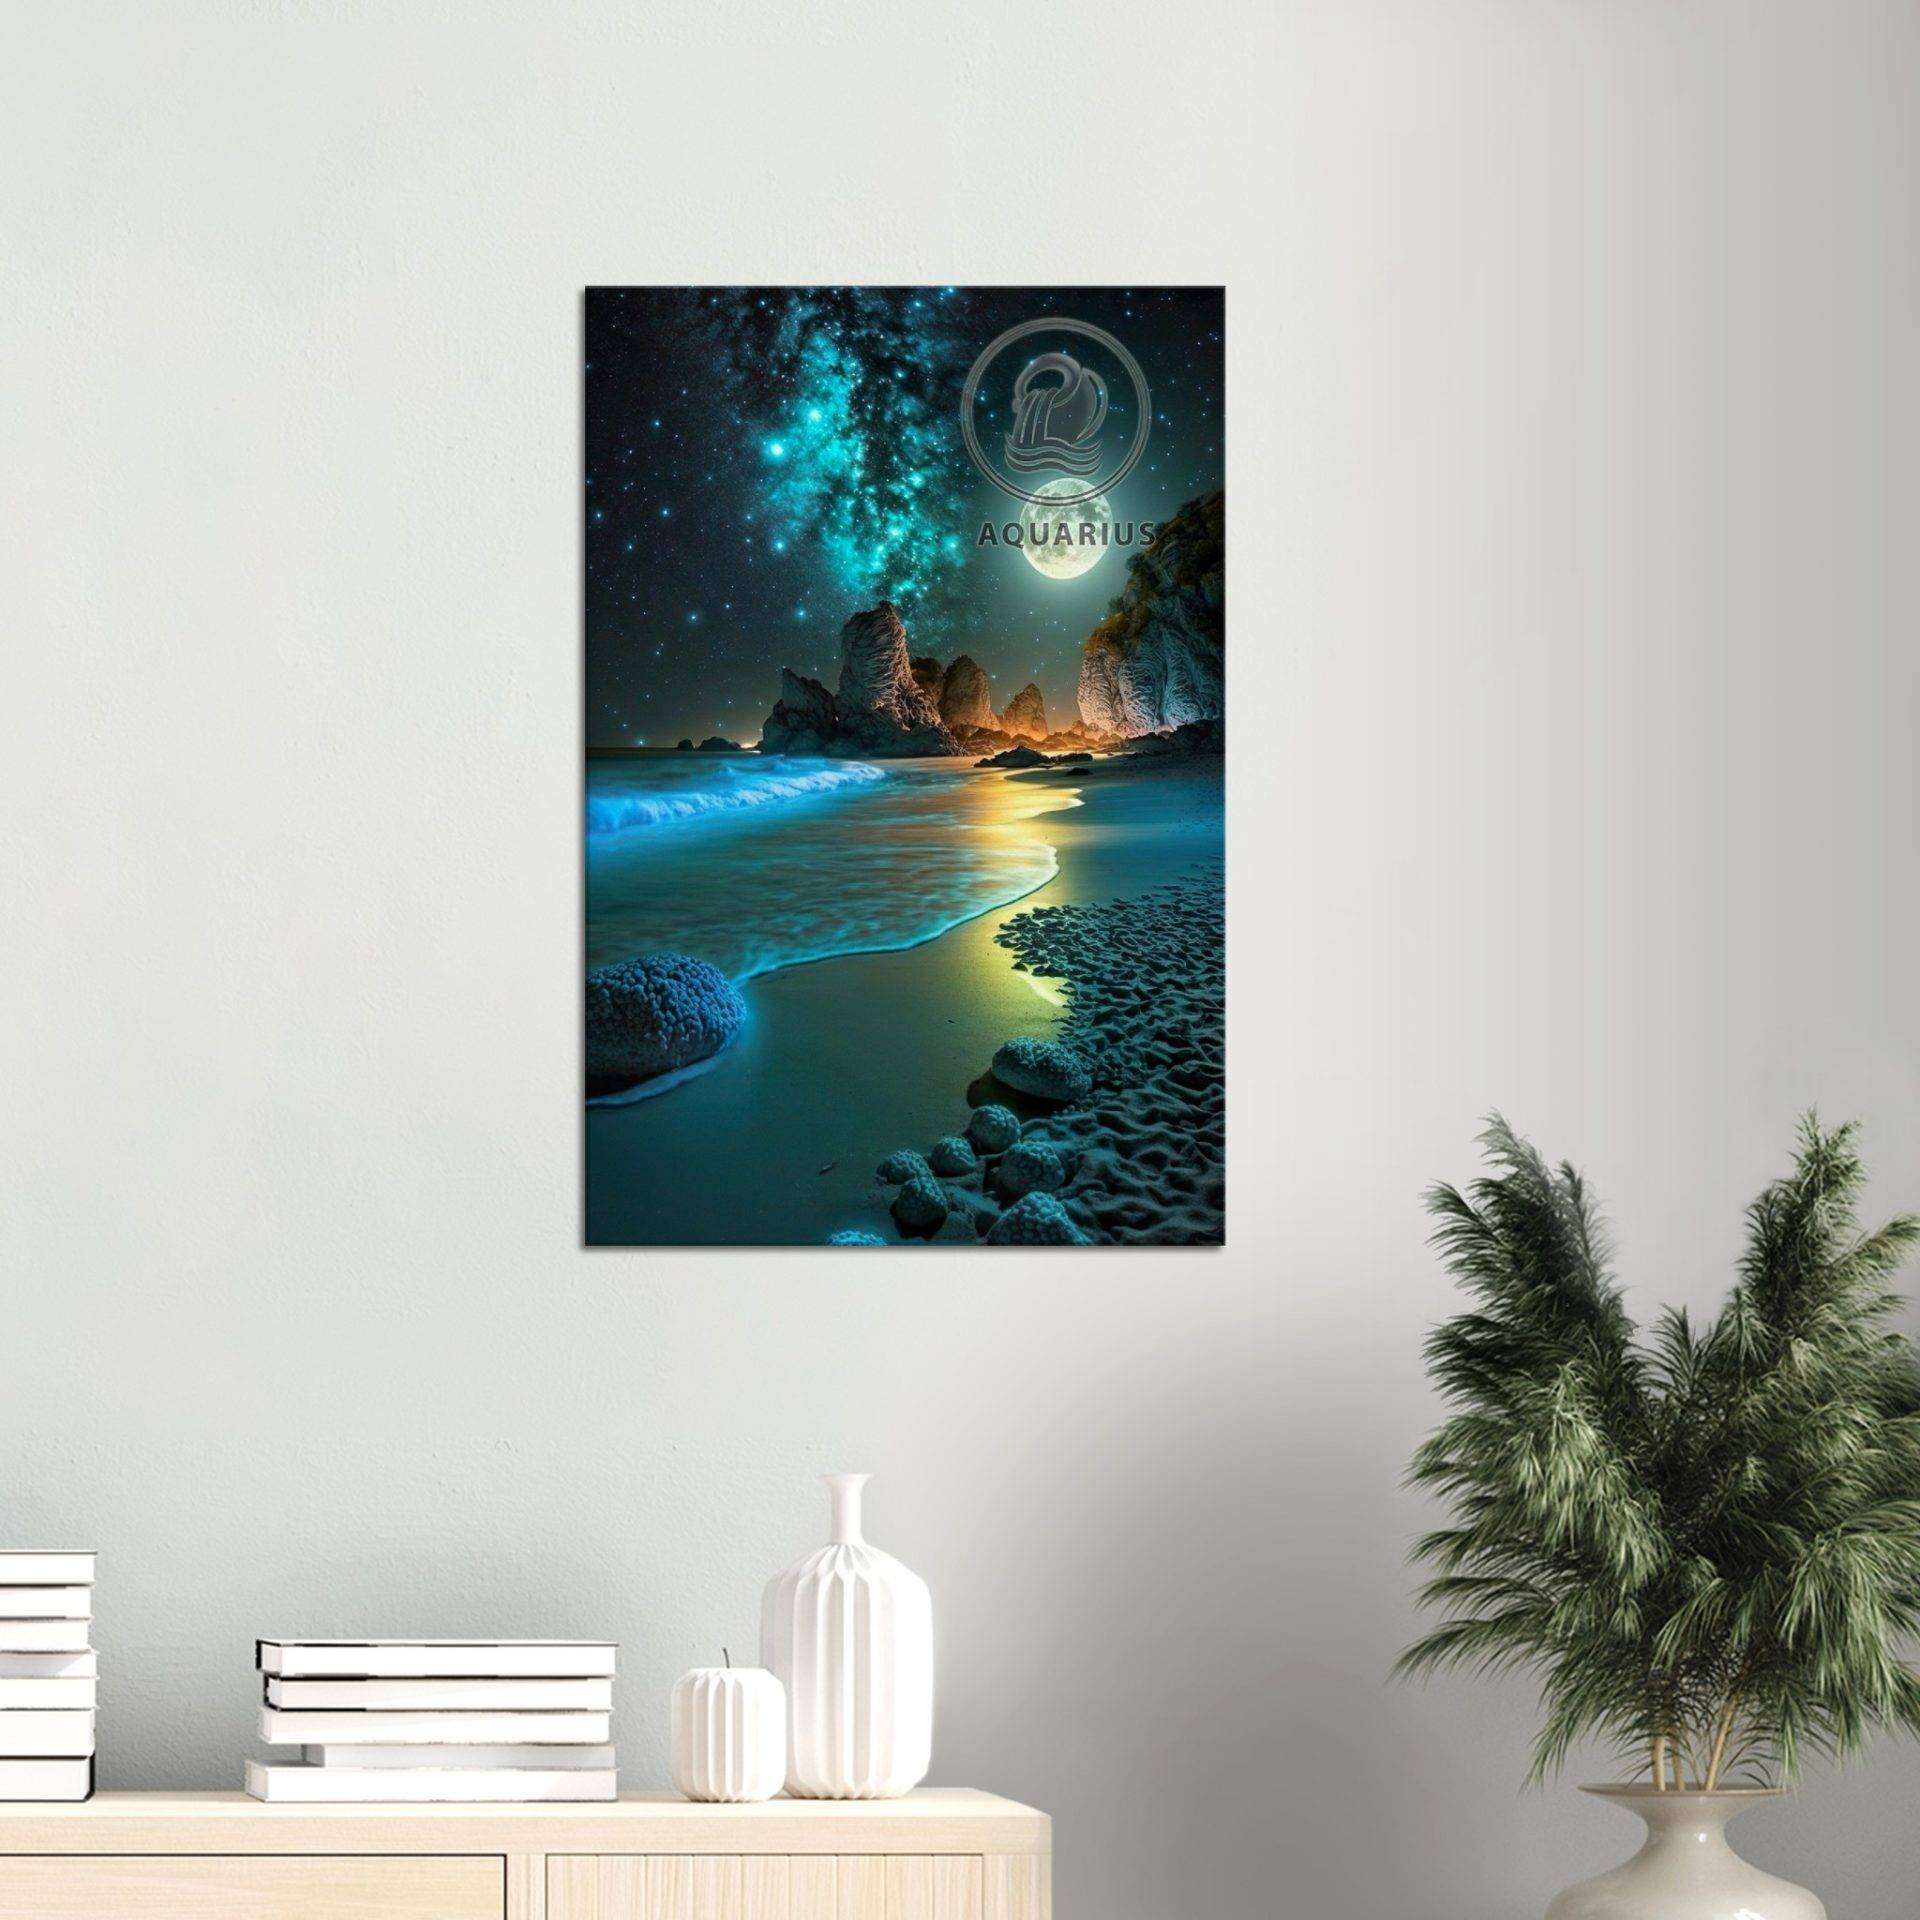 Moon with Aquarius Fabled Gallery https://fabledgallery.art/?post_type=product&p=36990